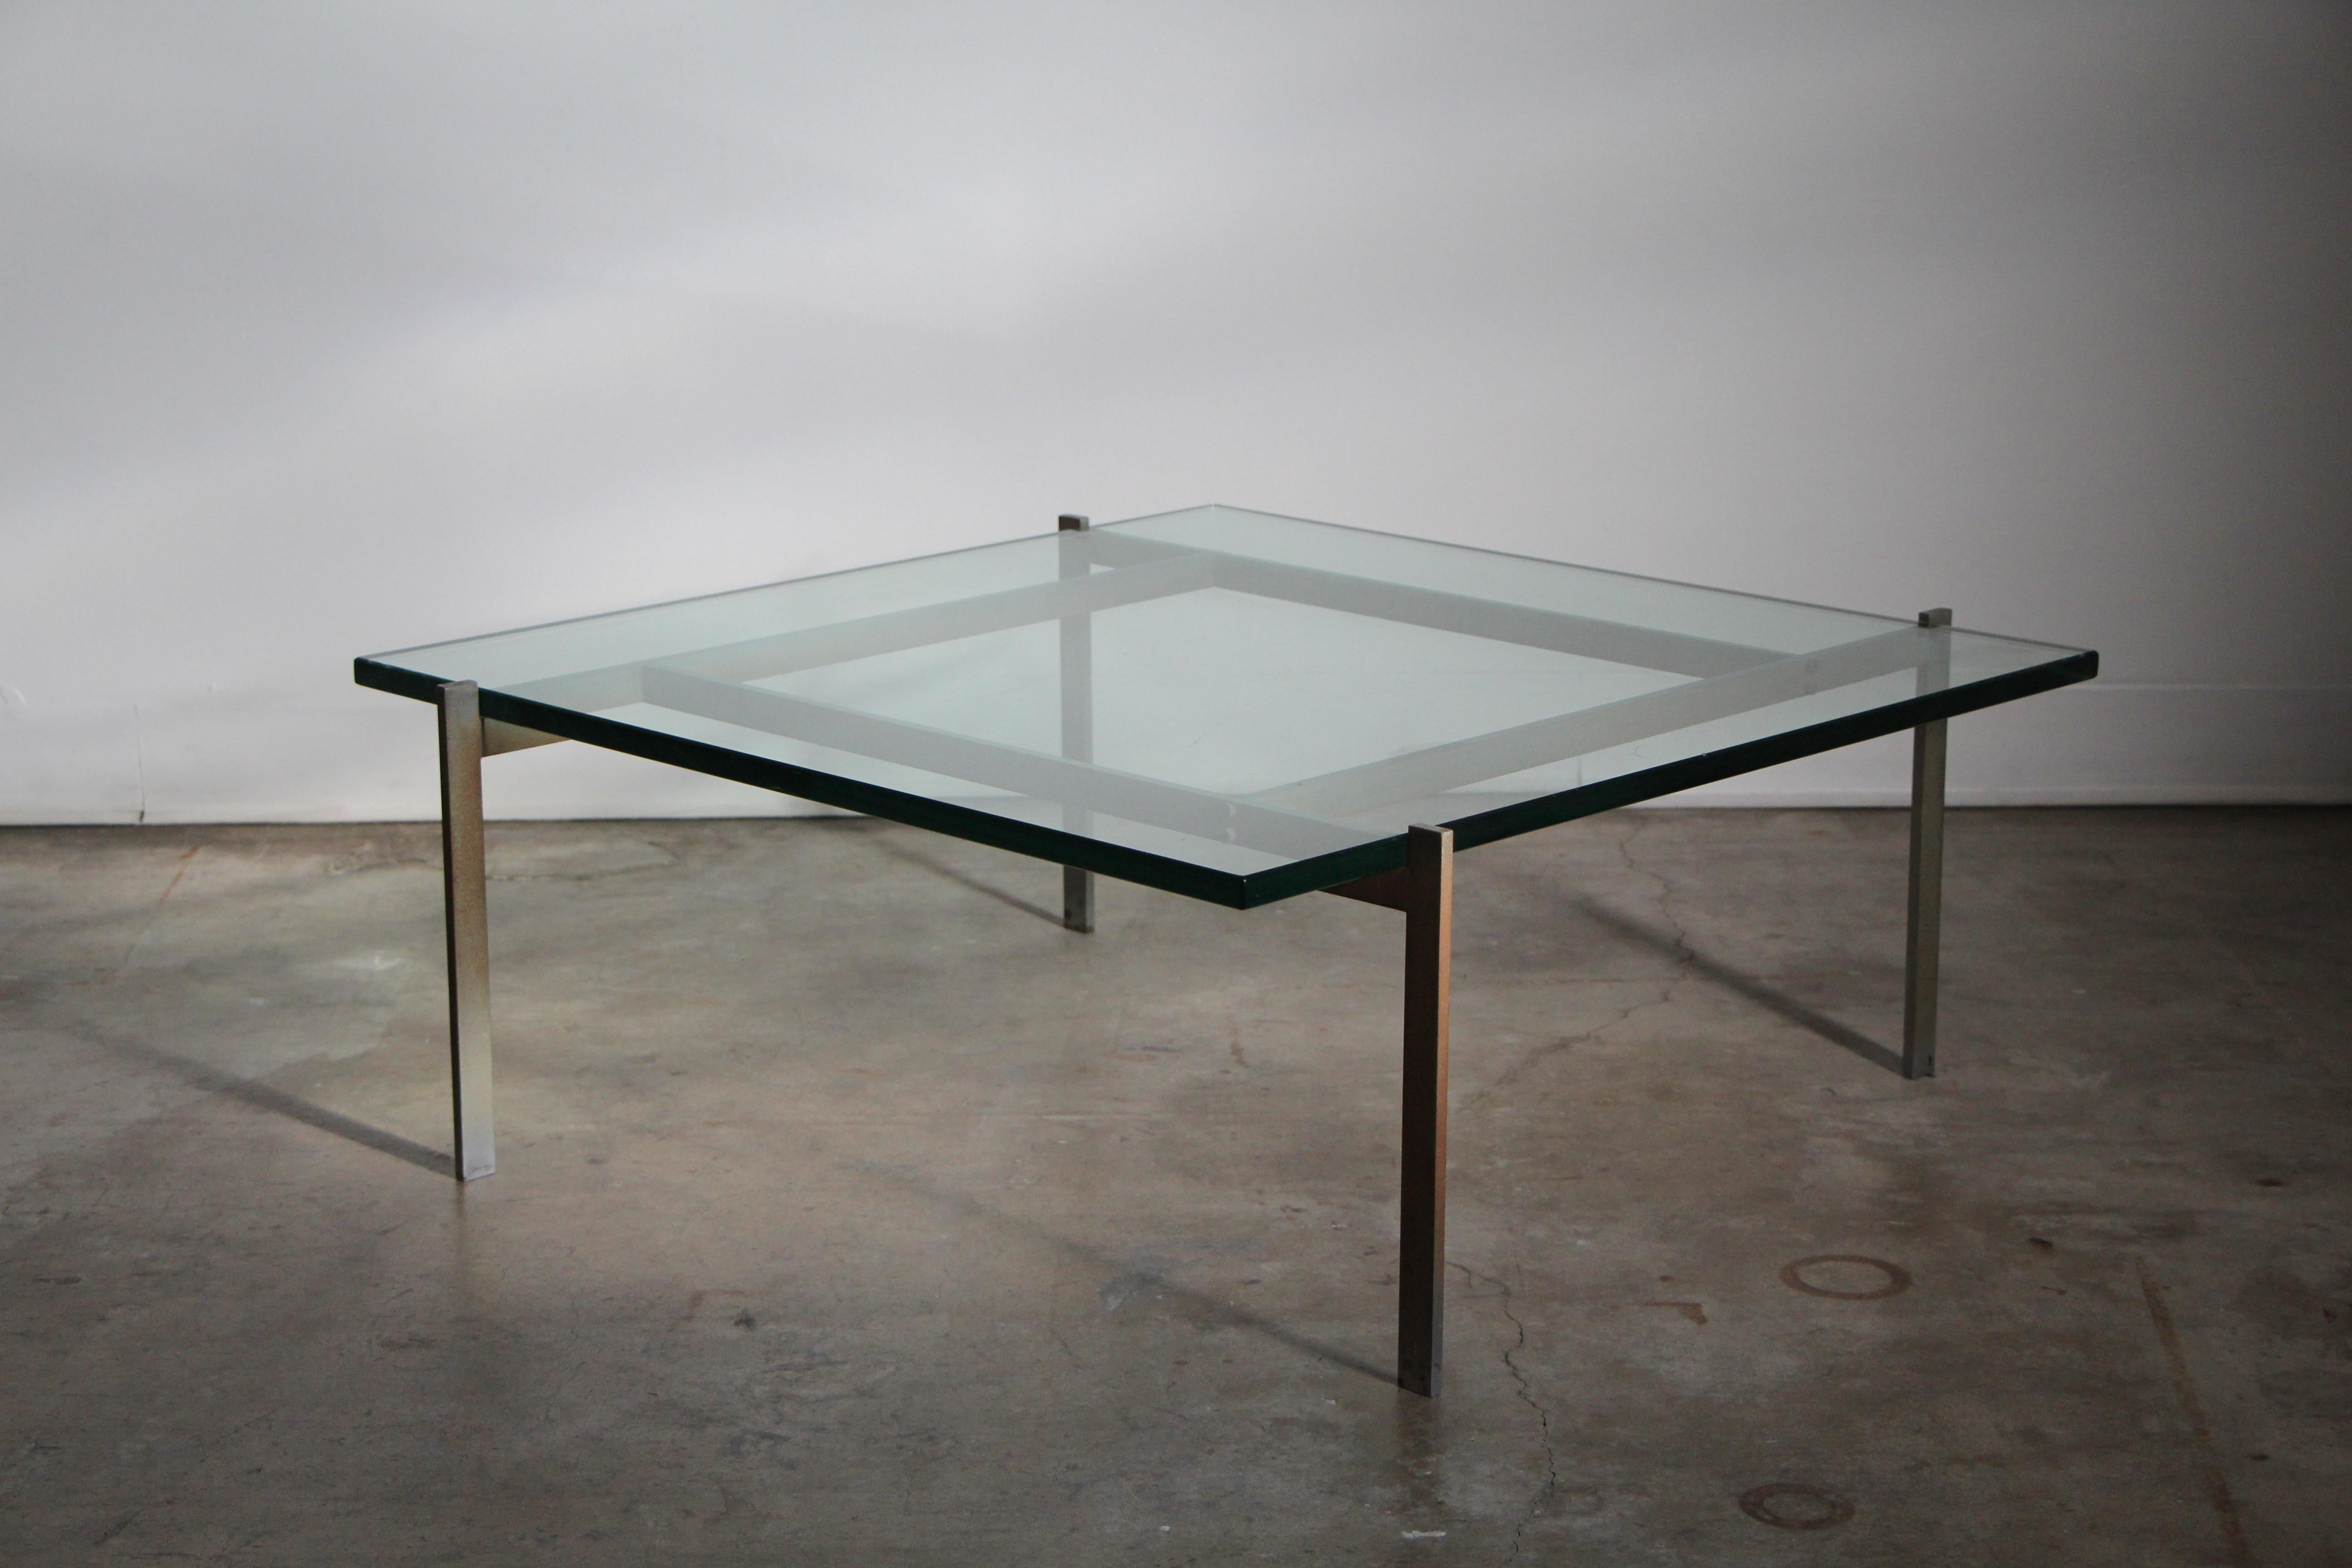 An early and collectible PK-61 coffee table designed by Poul Kjaerholm and made by E. Kold Christensen in Denmark, circa 1950s. The table features a satin-chrome steel frame with the original green glass top. The frame shows absolutely marvelous